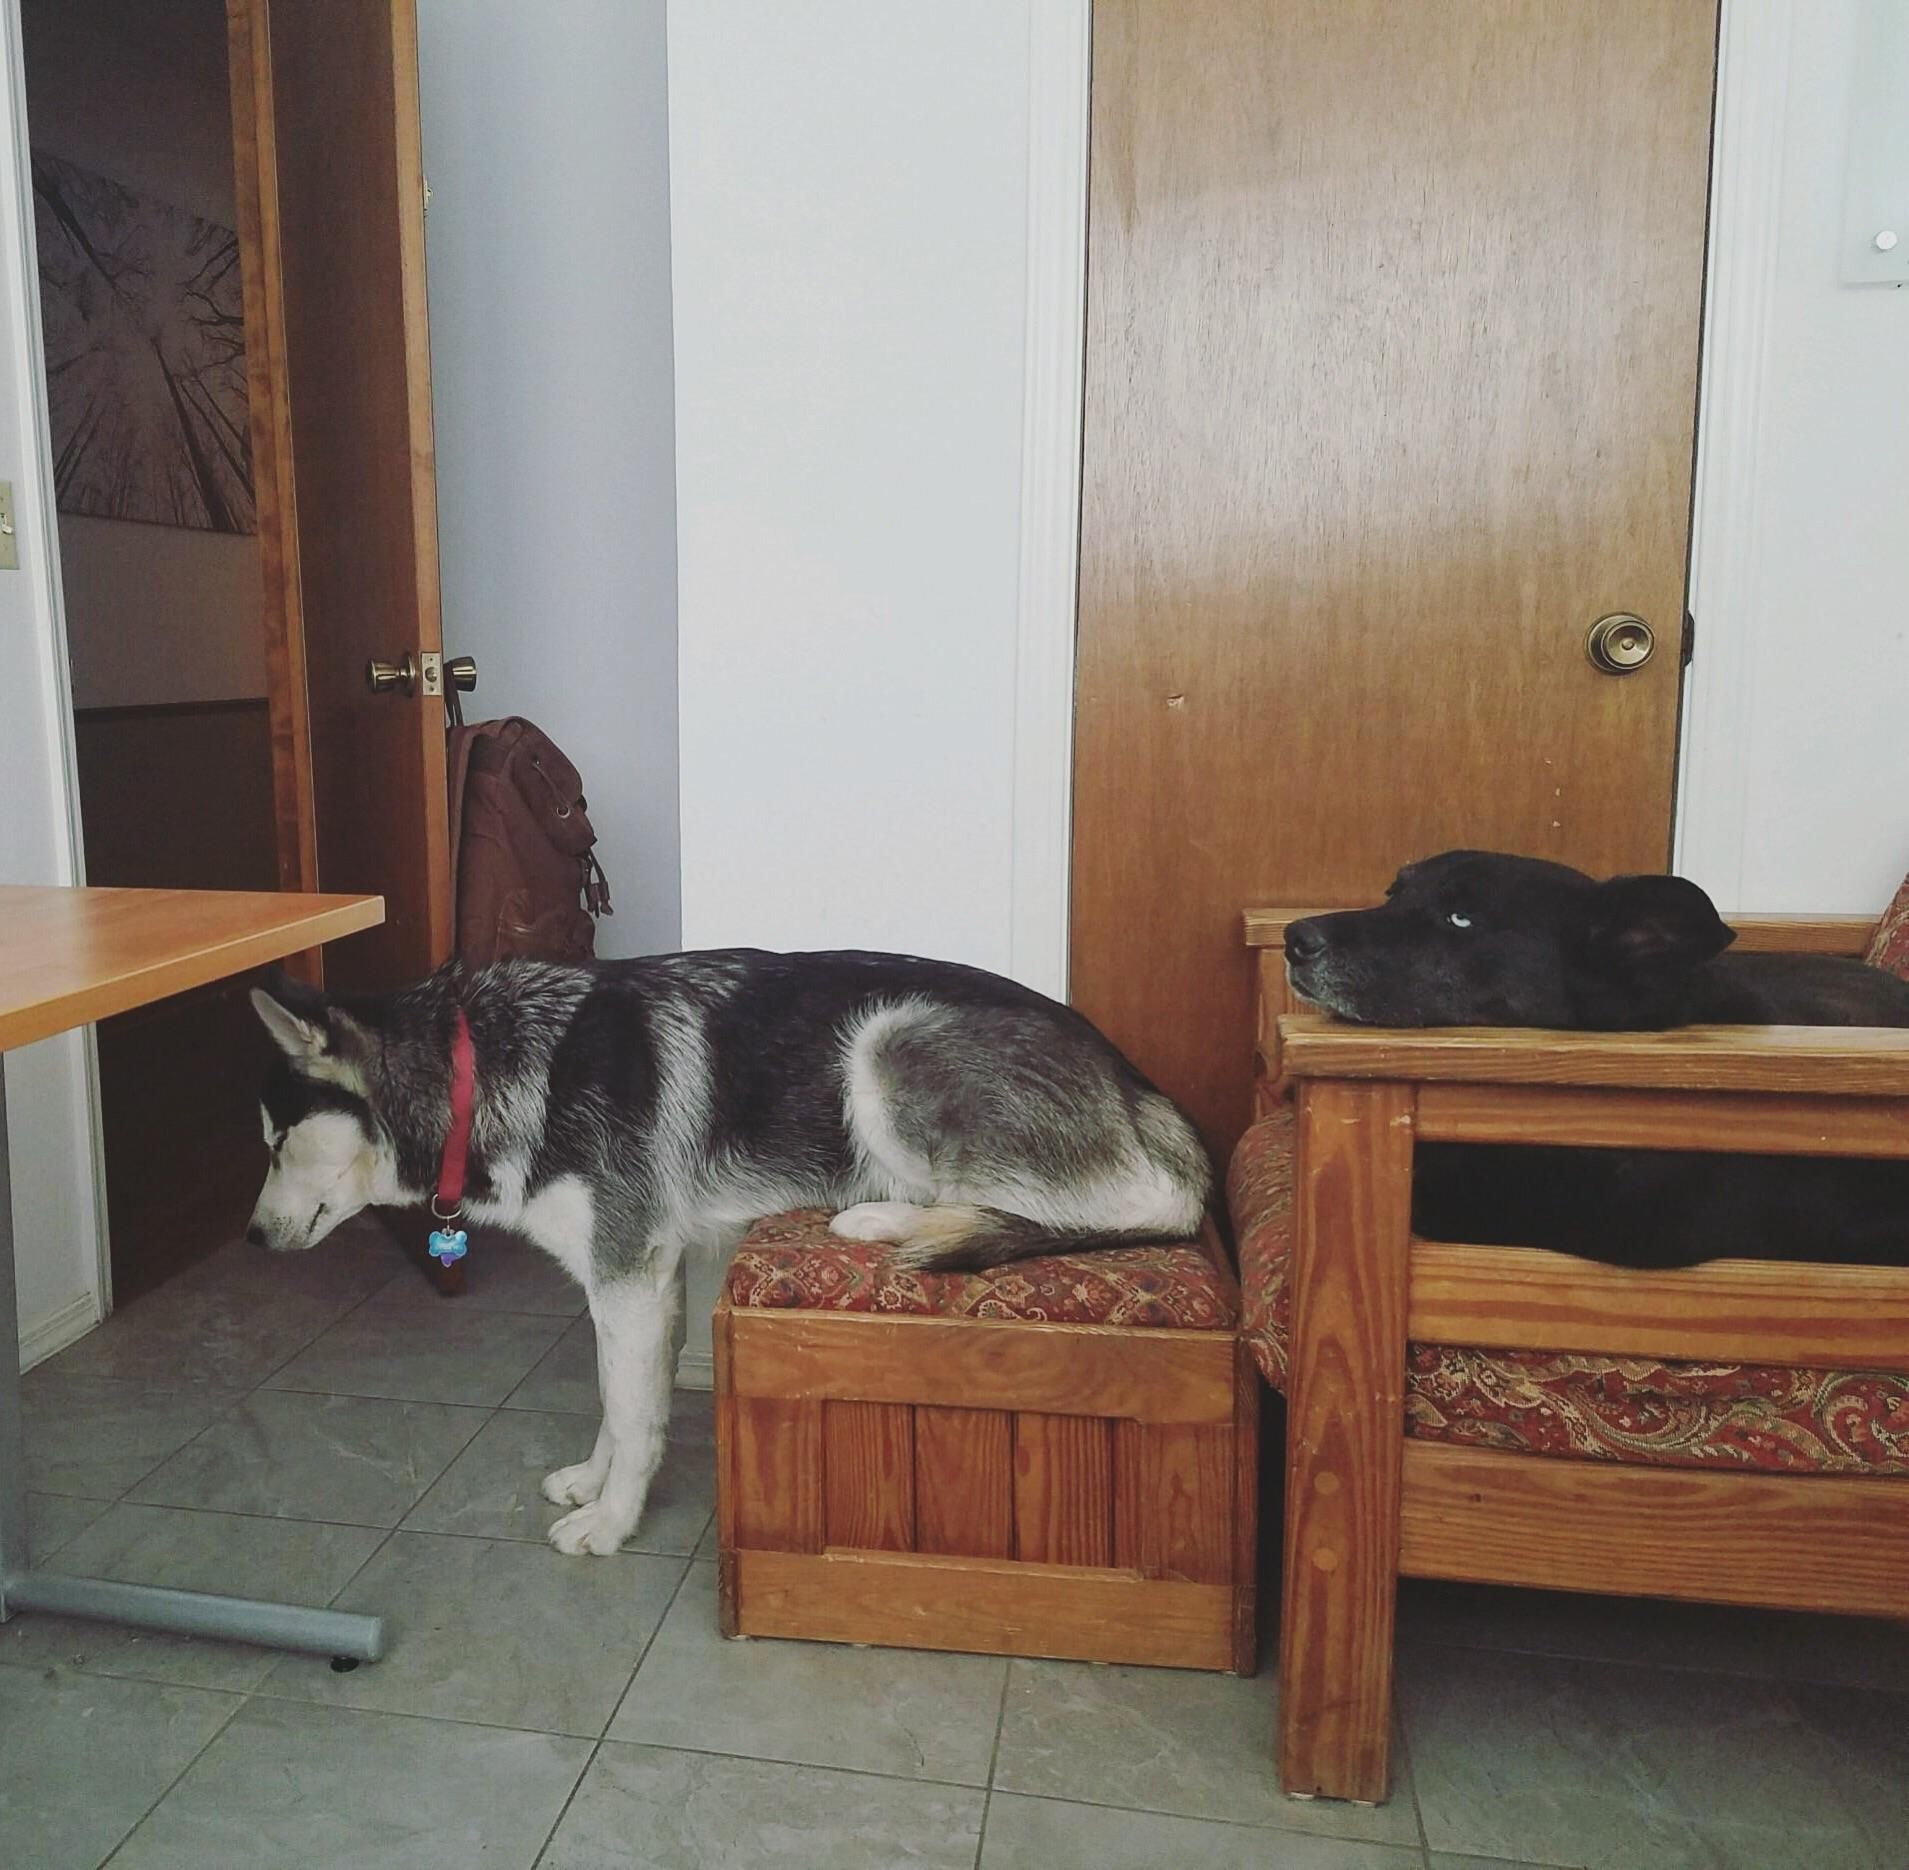 Doggo still sleepin where he used to fit as pupper